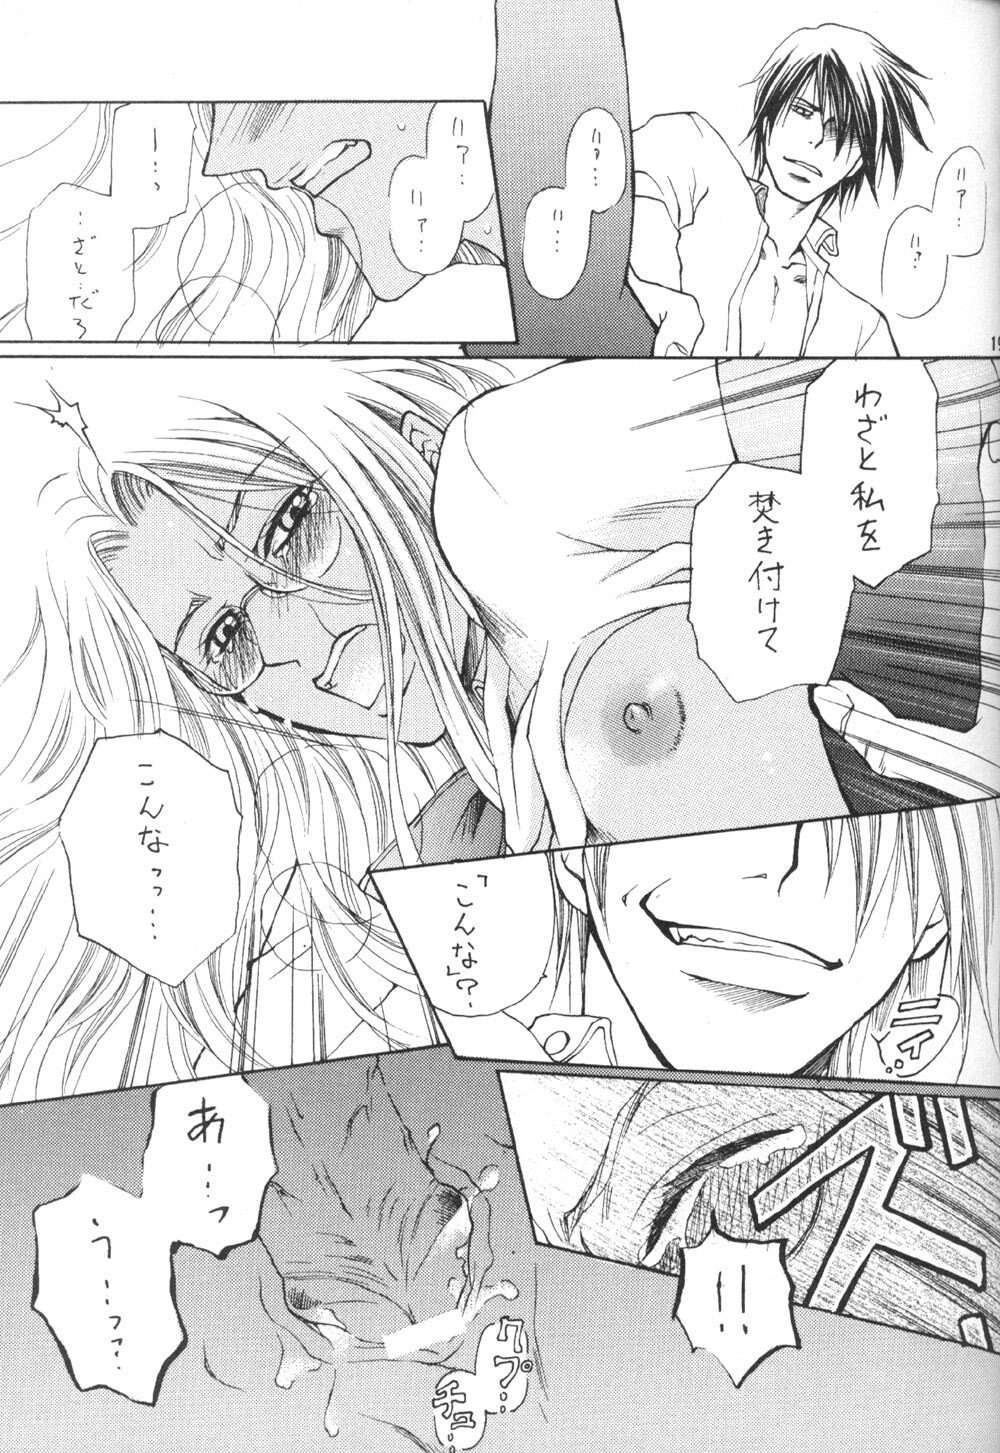 The Long Tunnel of Wanting You (Hellsing) page 19 full